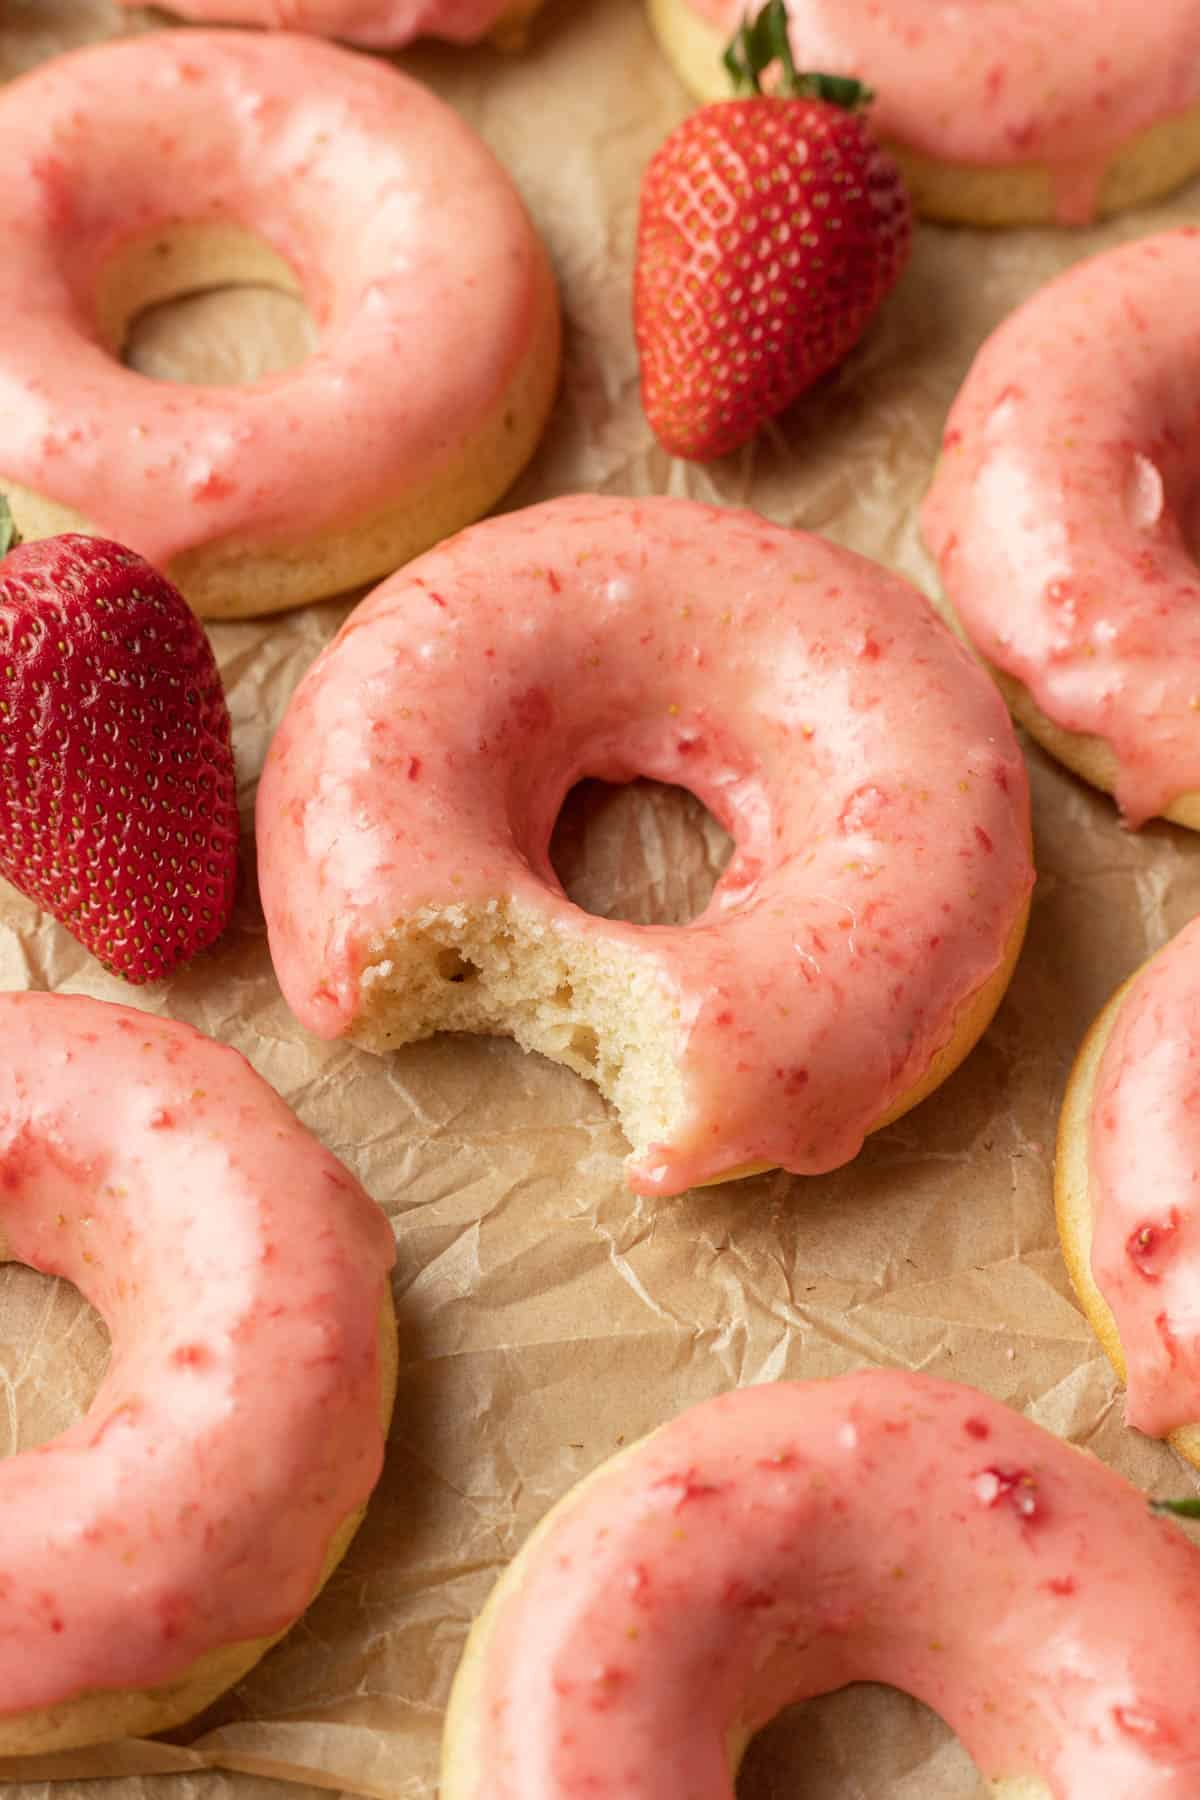 Freshly baked strawberry glazed donuts spread out on parchment paper with one donut in the middle having a bite taken out of it.